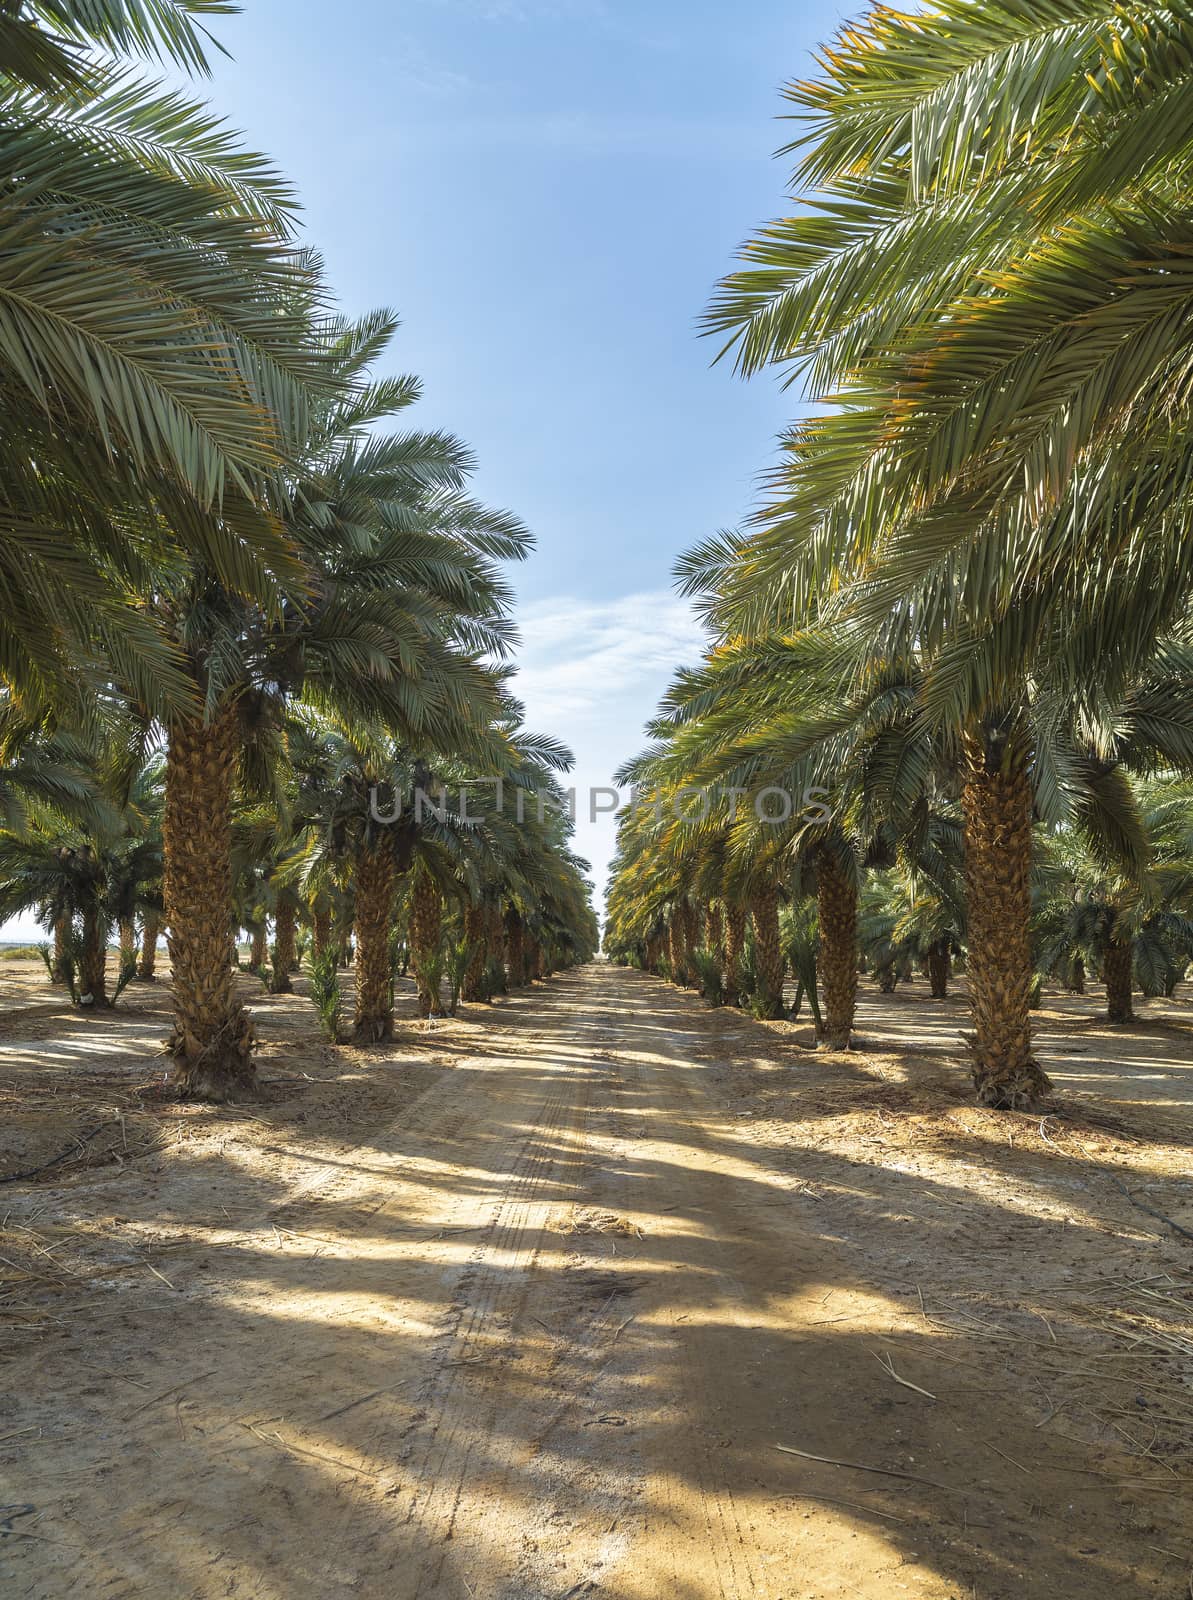 the growing palm trees and dirt road